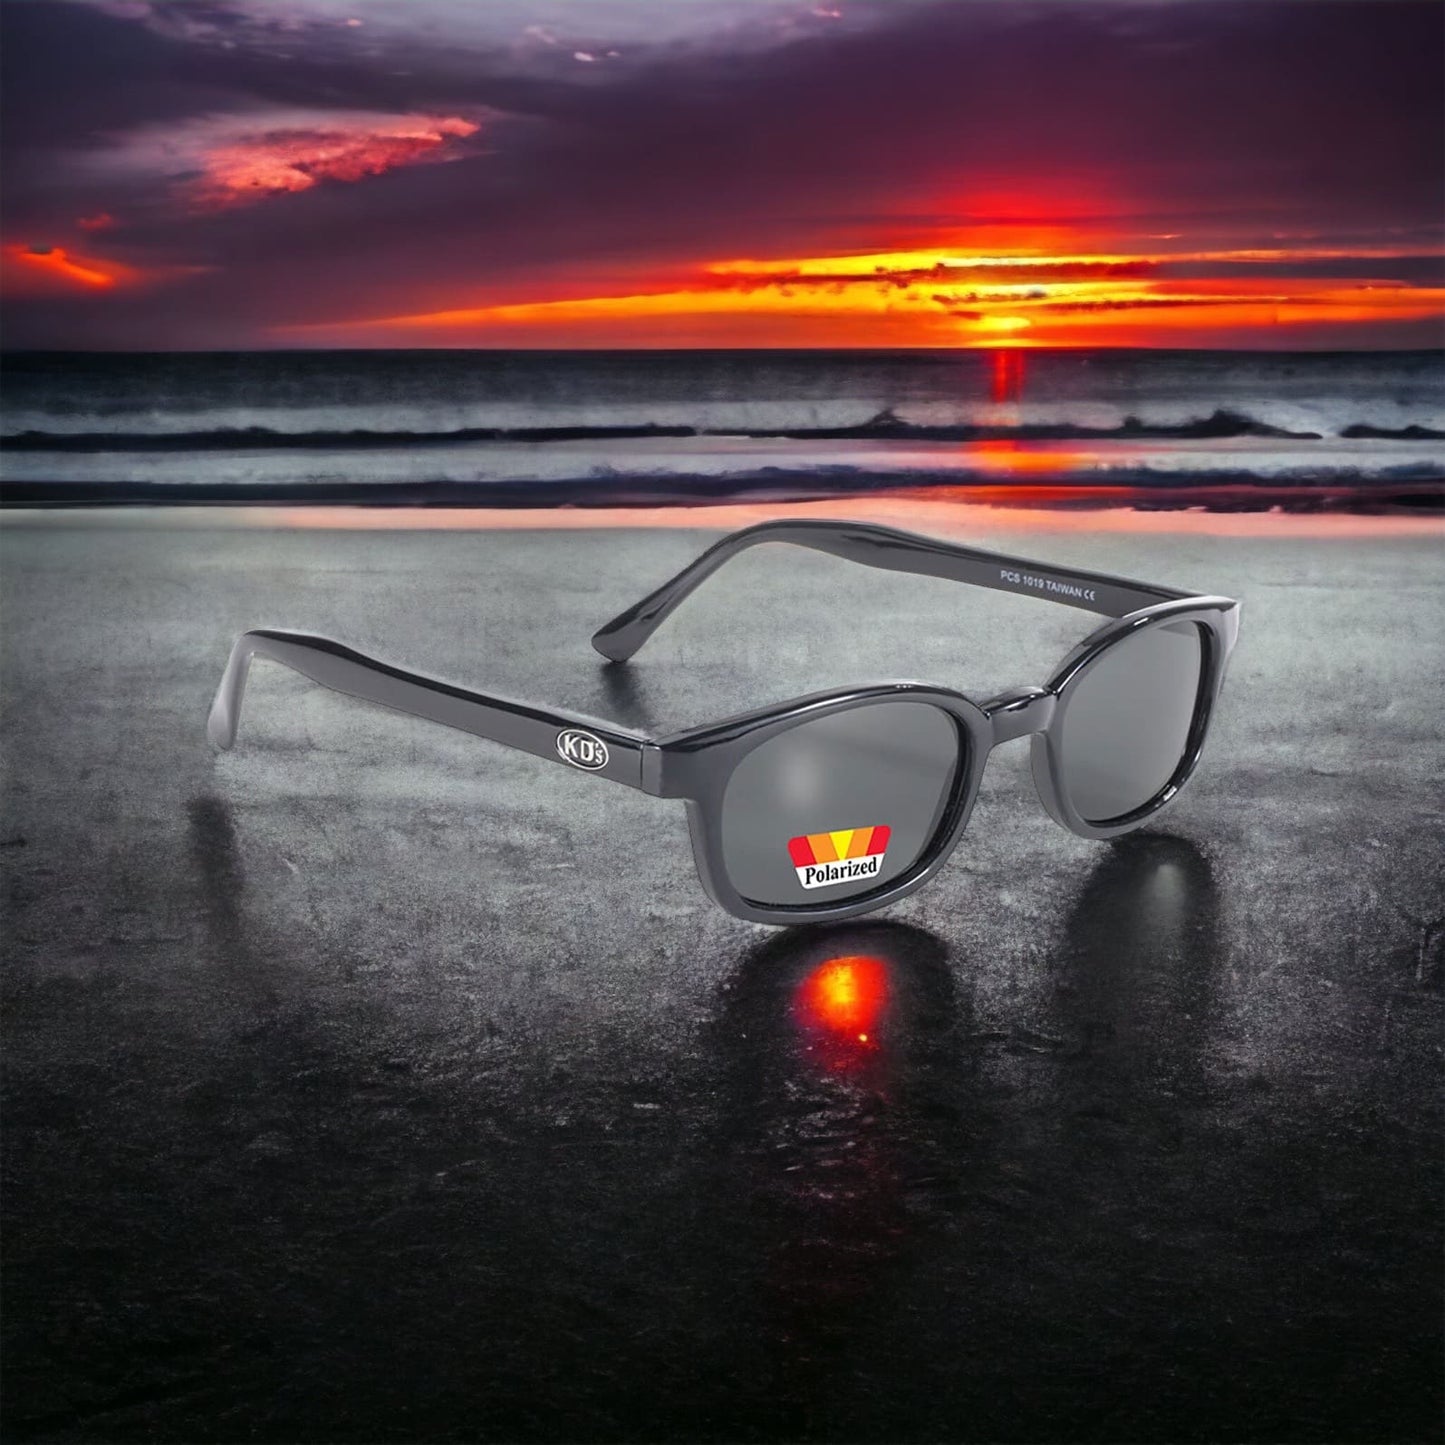 The X-KD's 1019 sunglasses with polarized grey lenses and a chic black frame placed on the beach behind a sunset